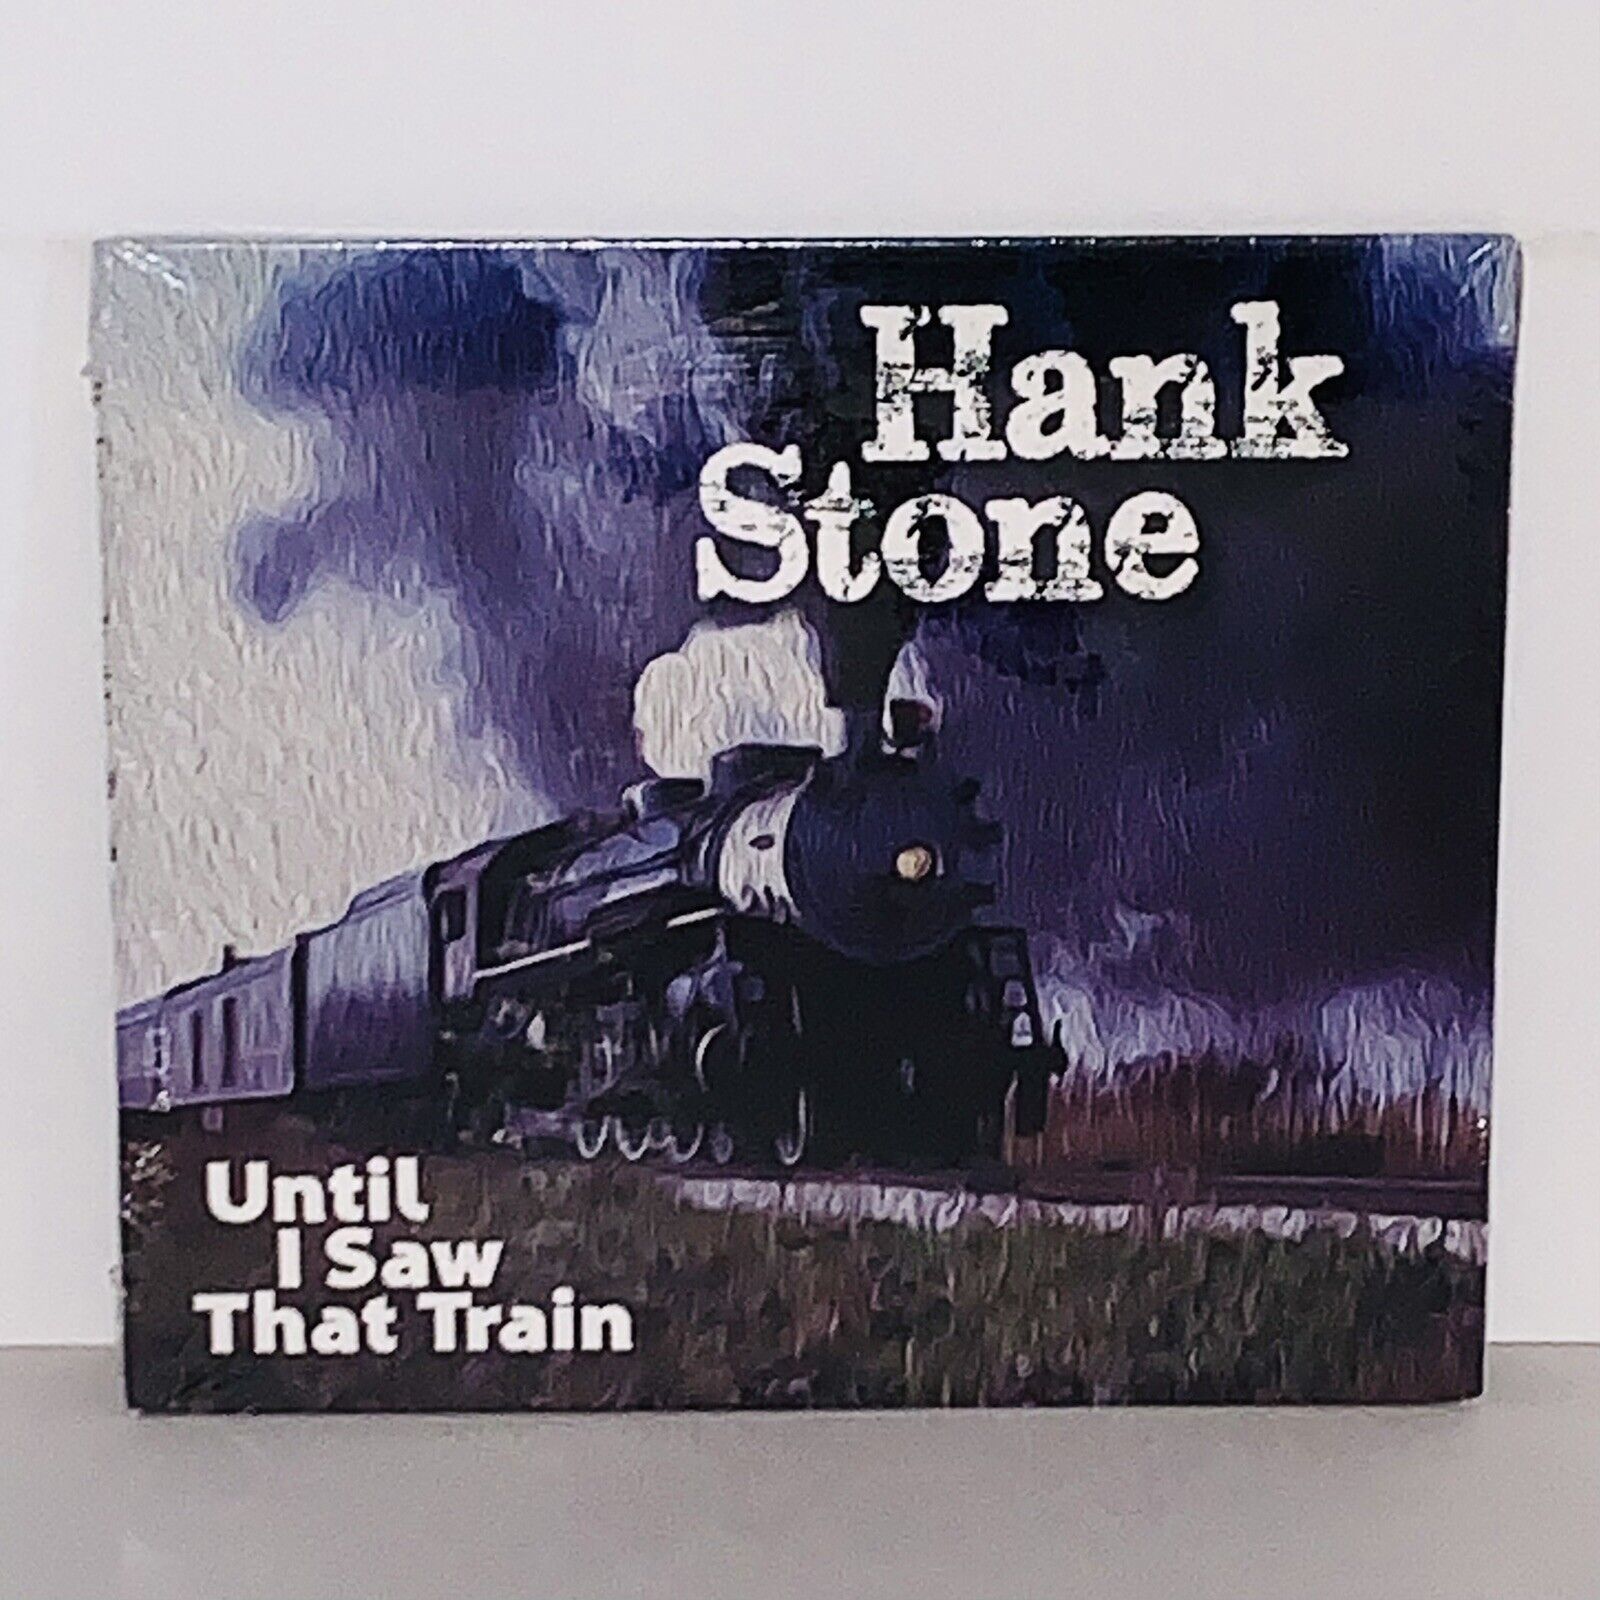 Factory Sealed (shrink wrapped) Until I Saw That Train by Hank Stone CD